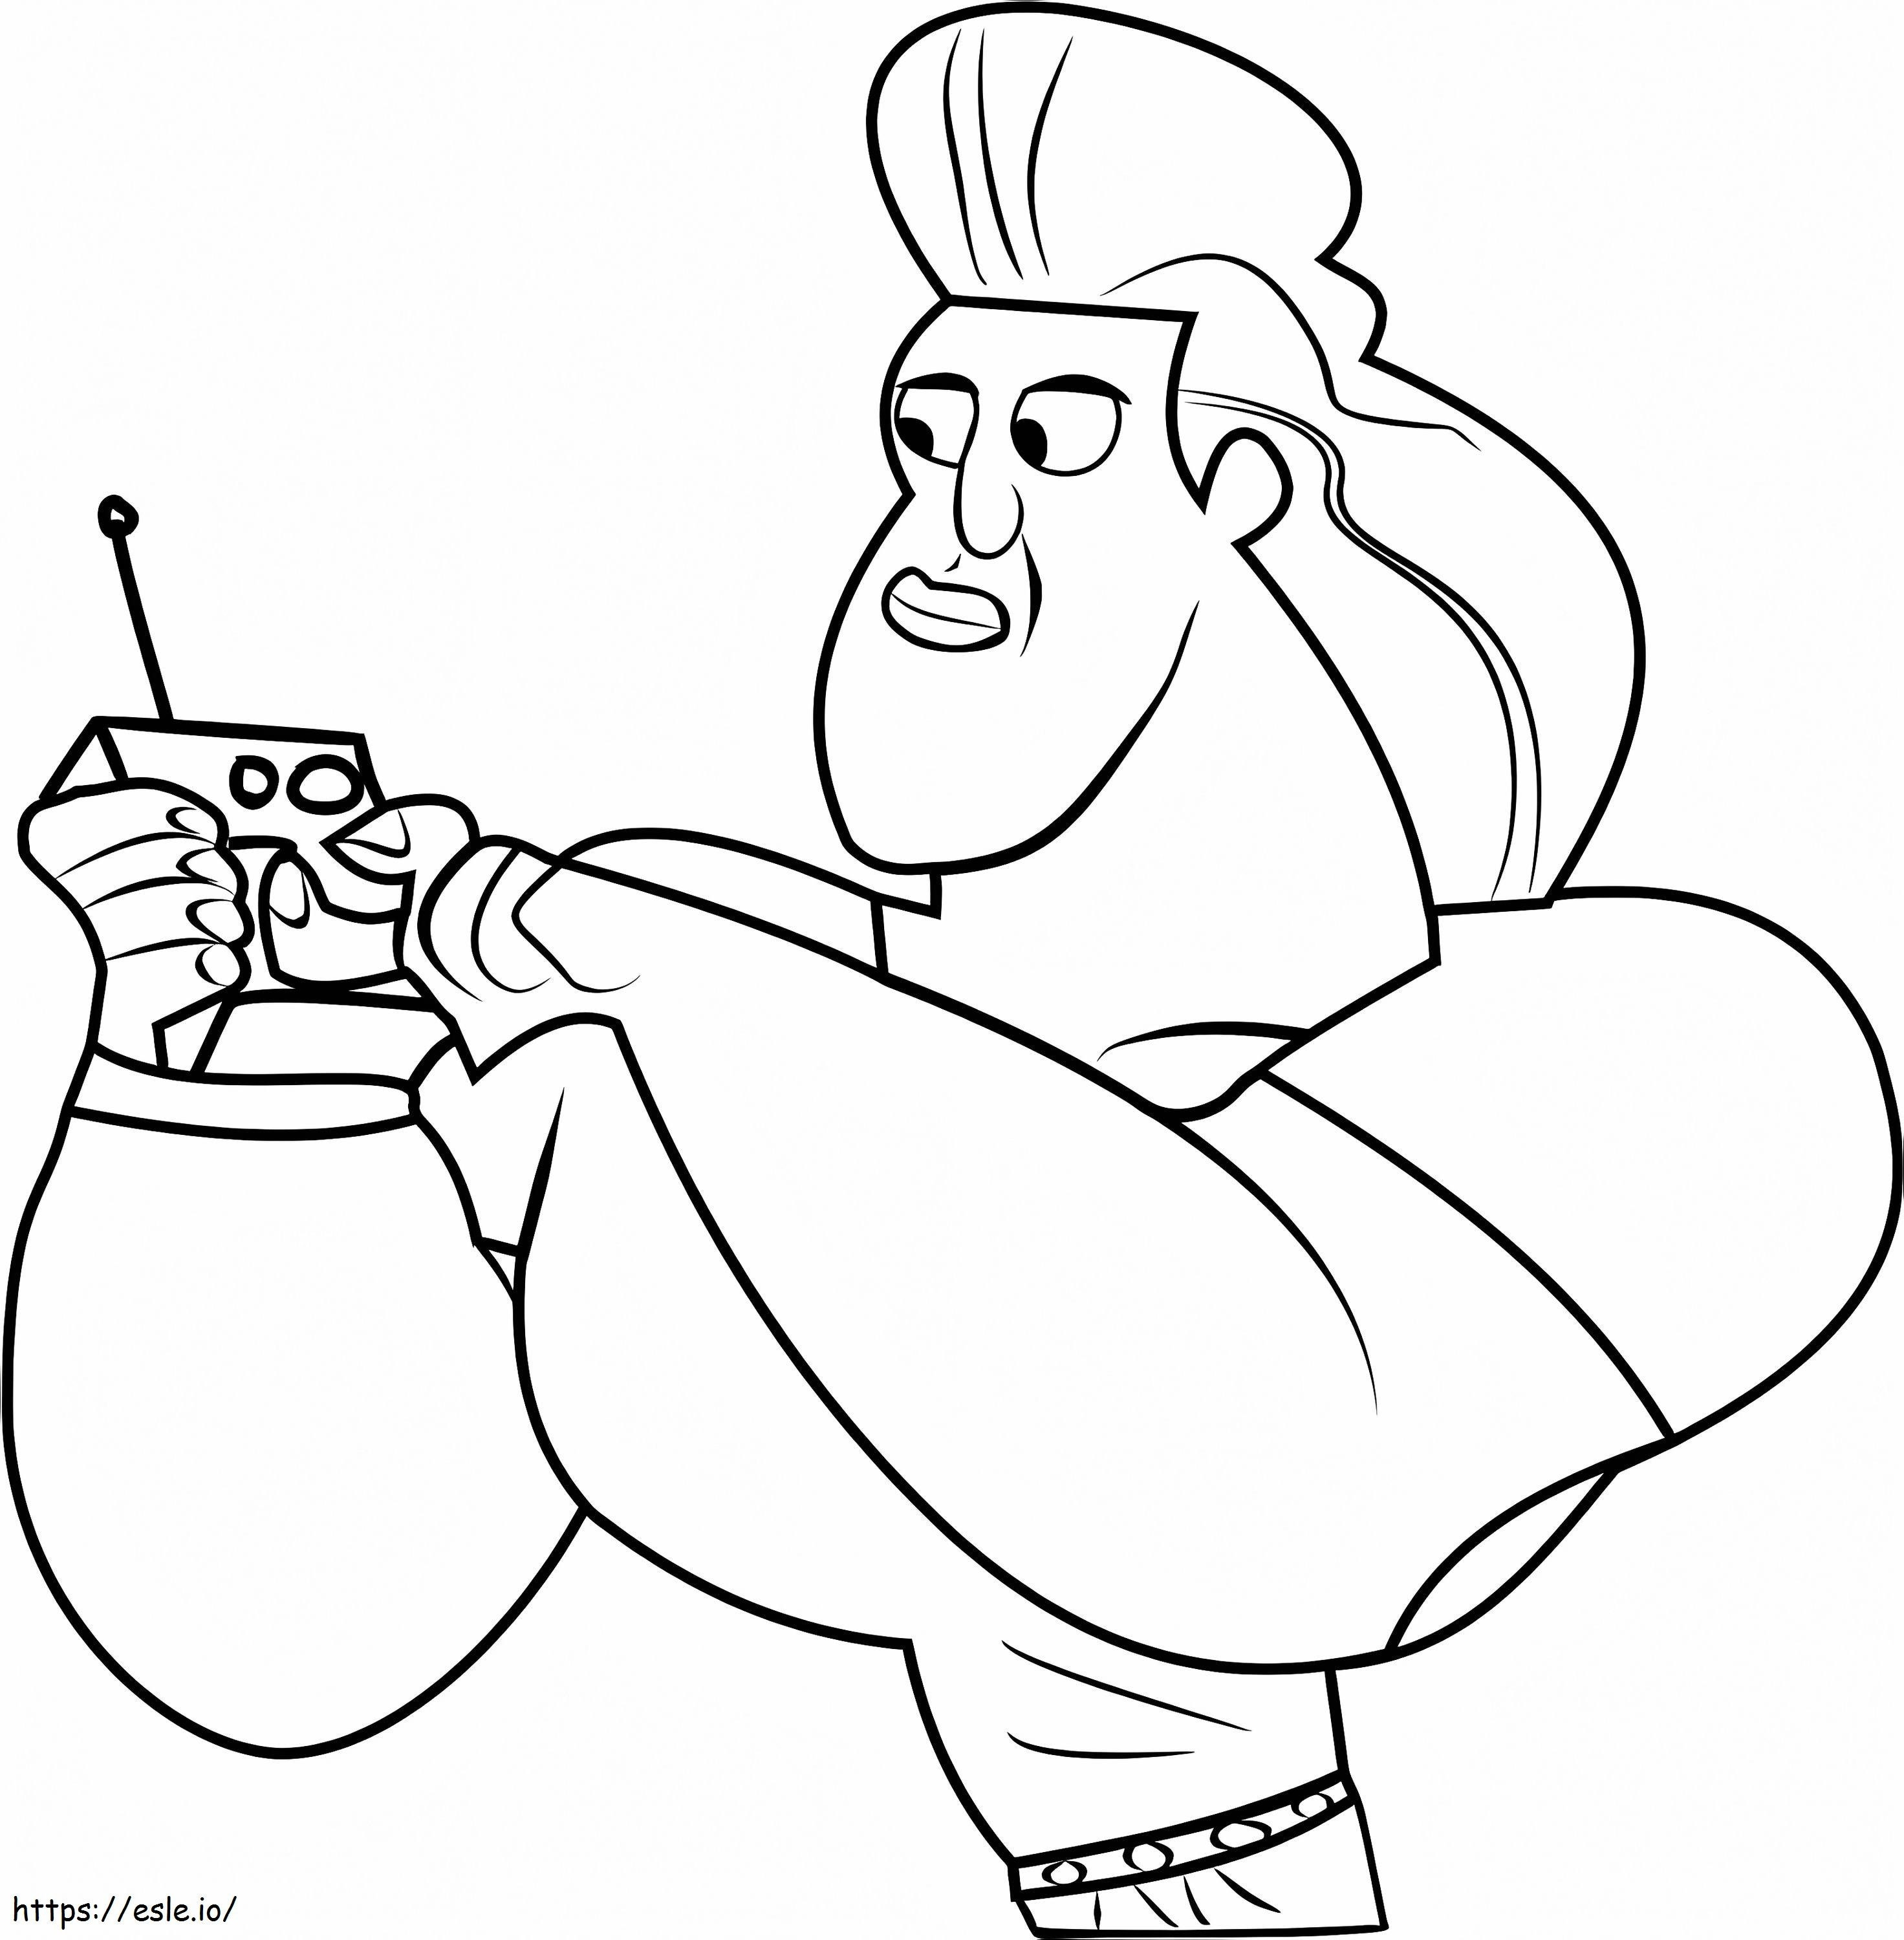 Dabio From Wild Kratts coloring page